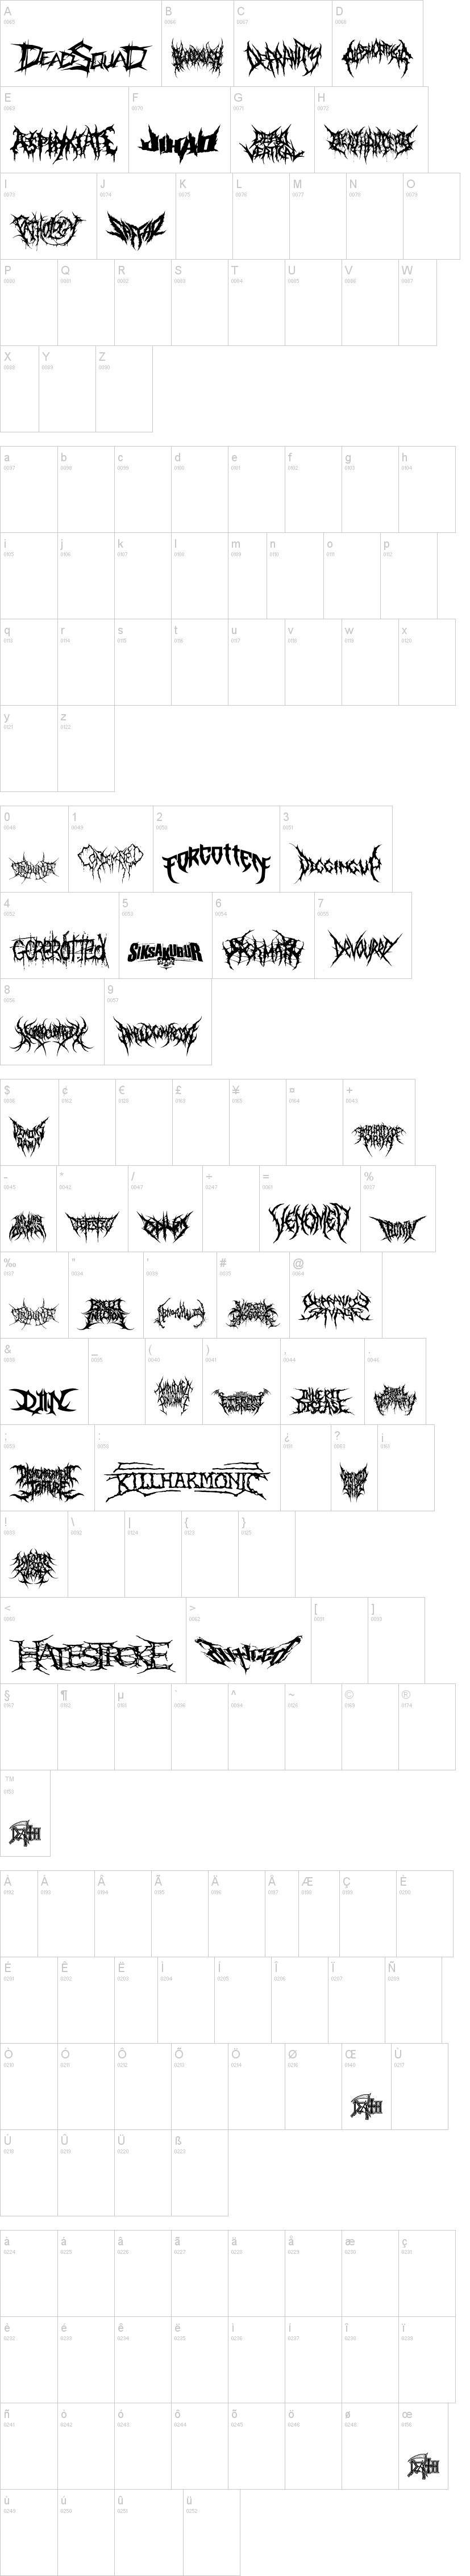 xii ultimate death metal font